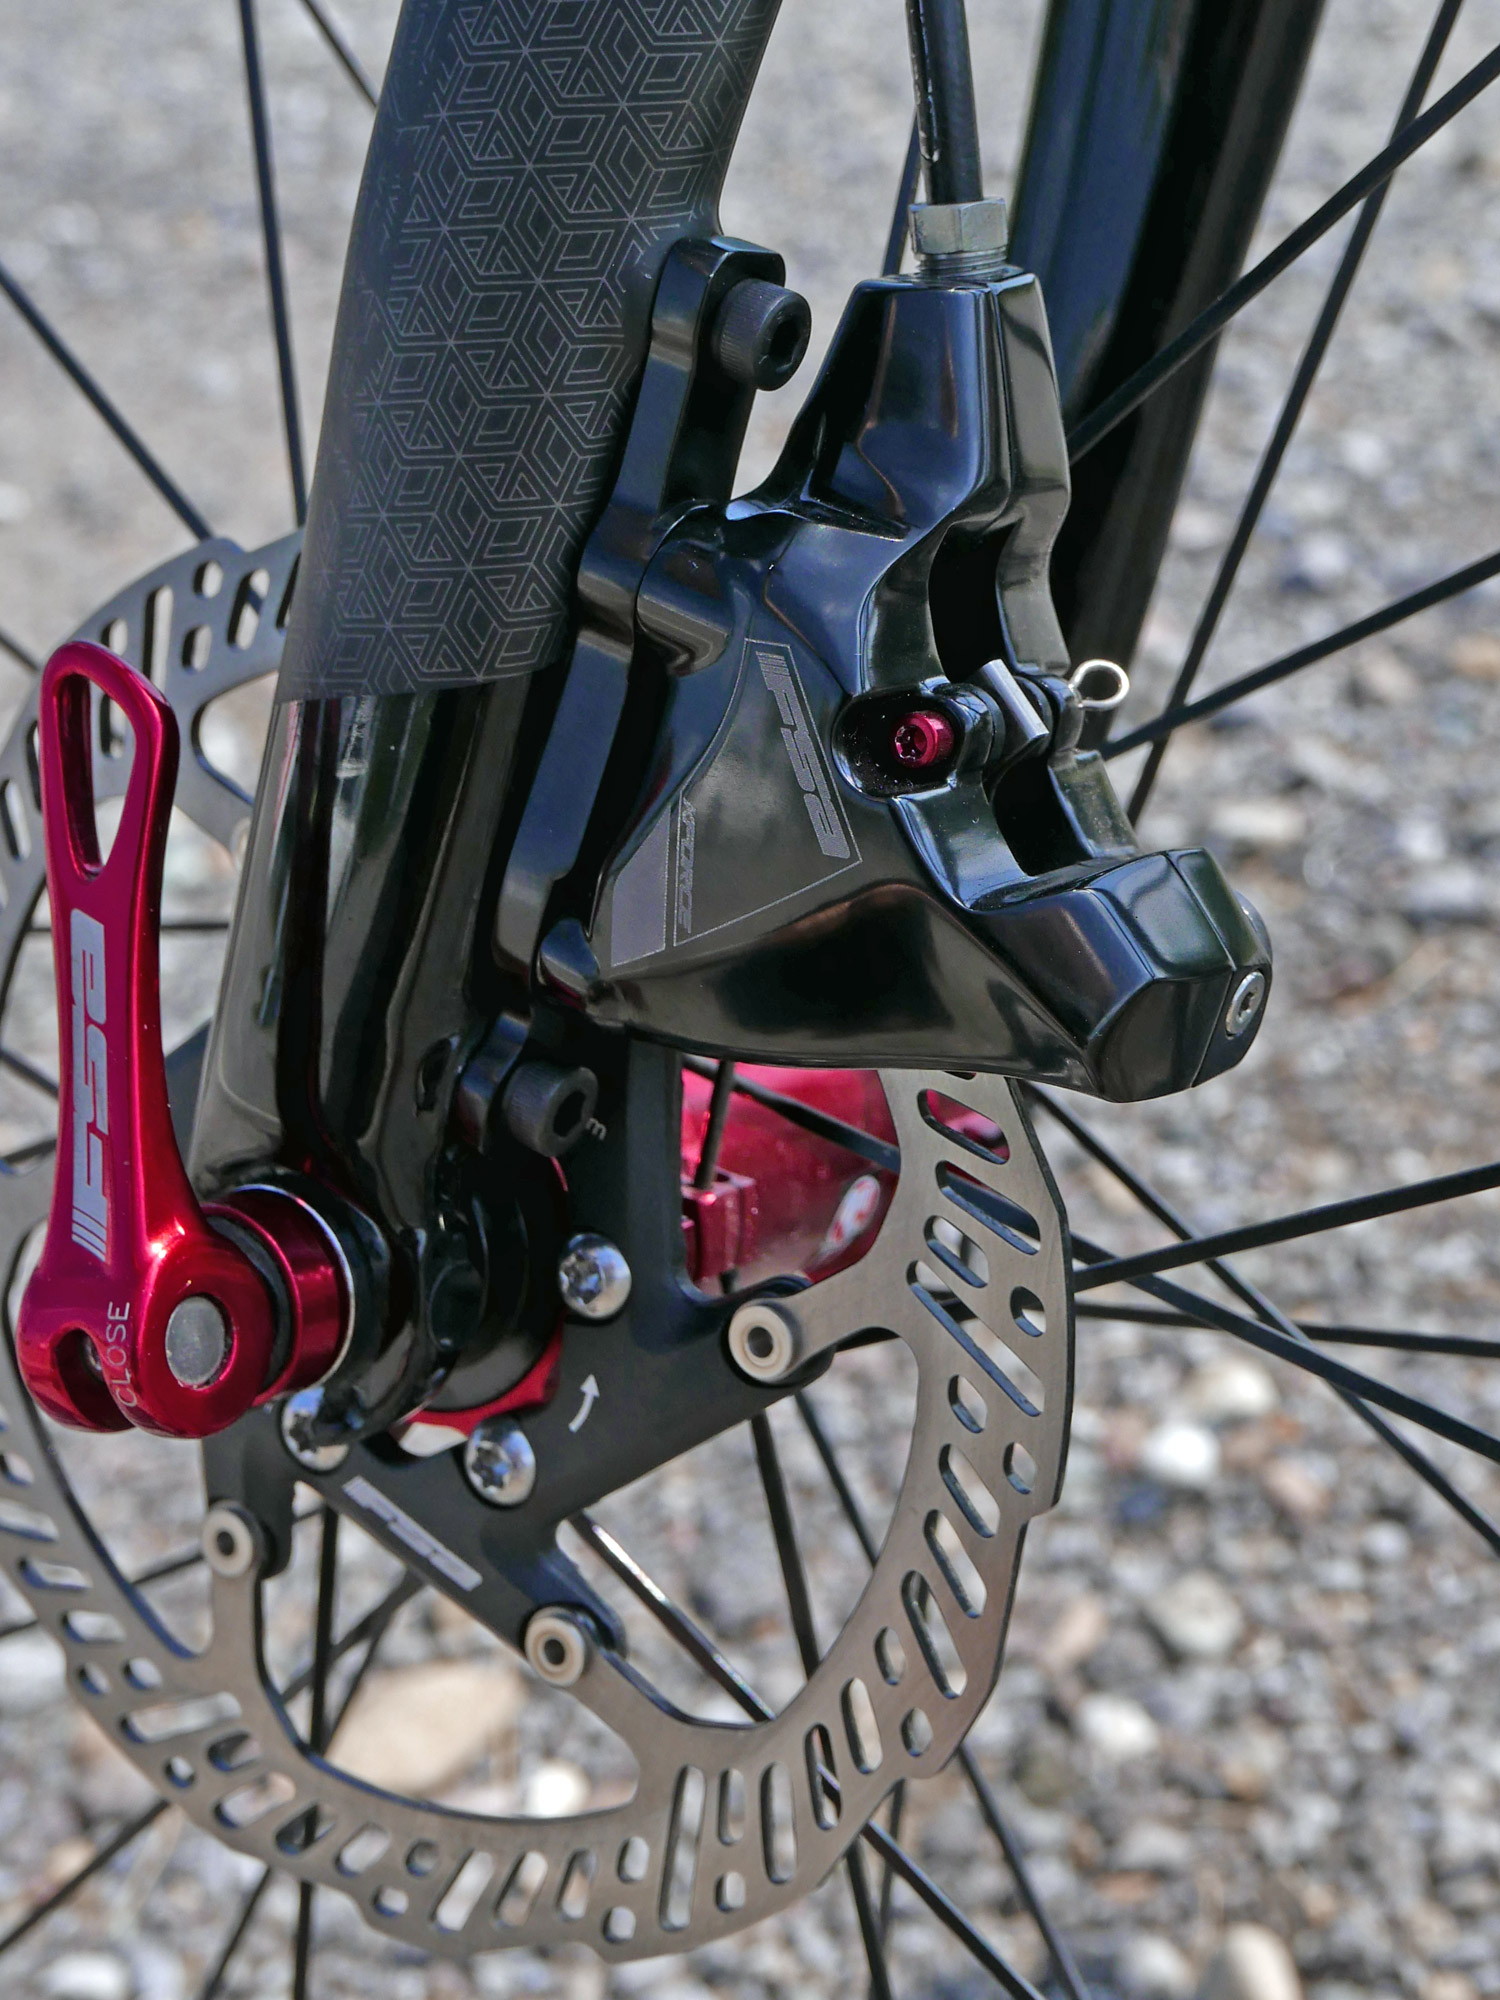 EB16: First Look at FSA semi-wireless K-Force WE disc brake prototype group